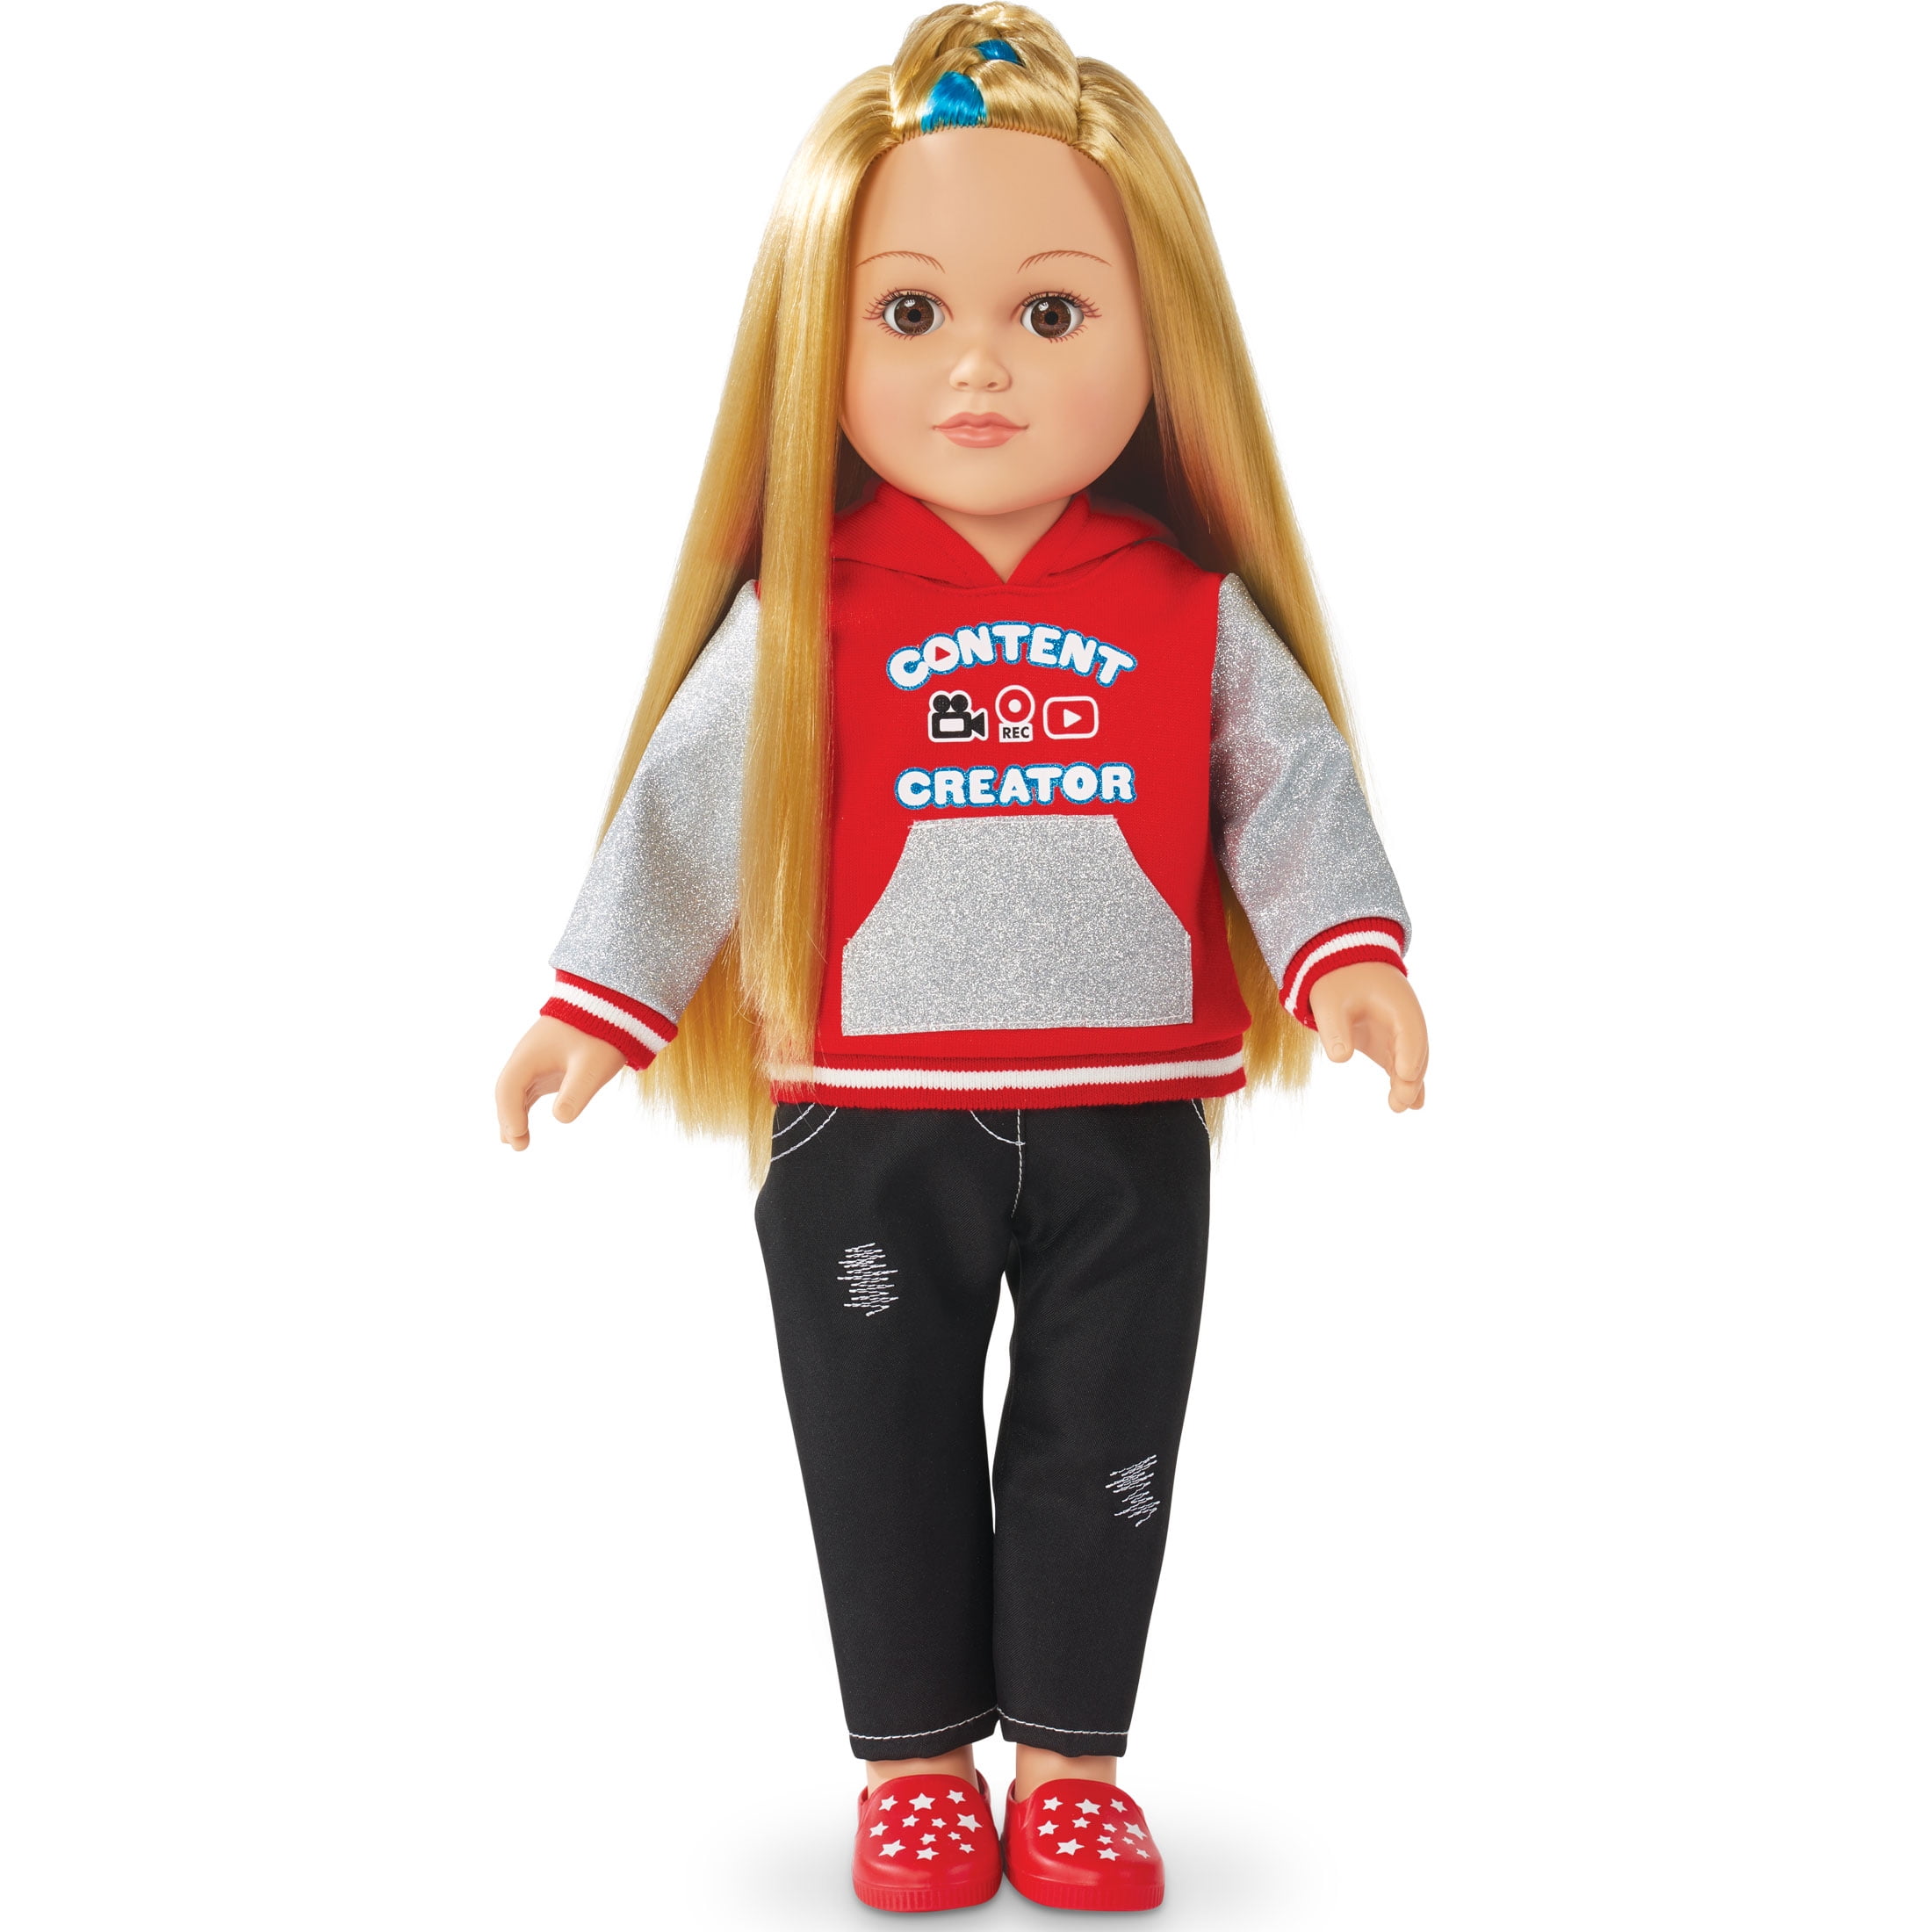 New MY LIFE AS Soccer Player 18” Inch American Girl Doll Blonde NEW IN BOX 